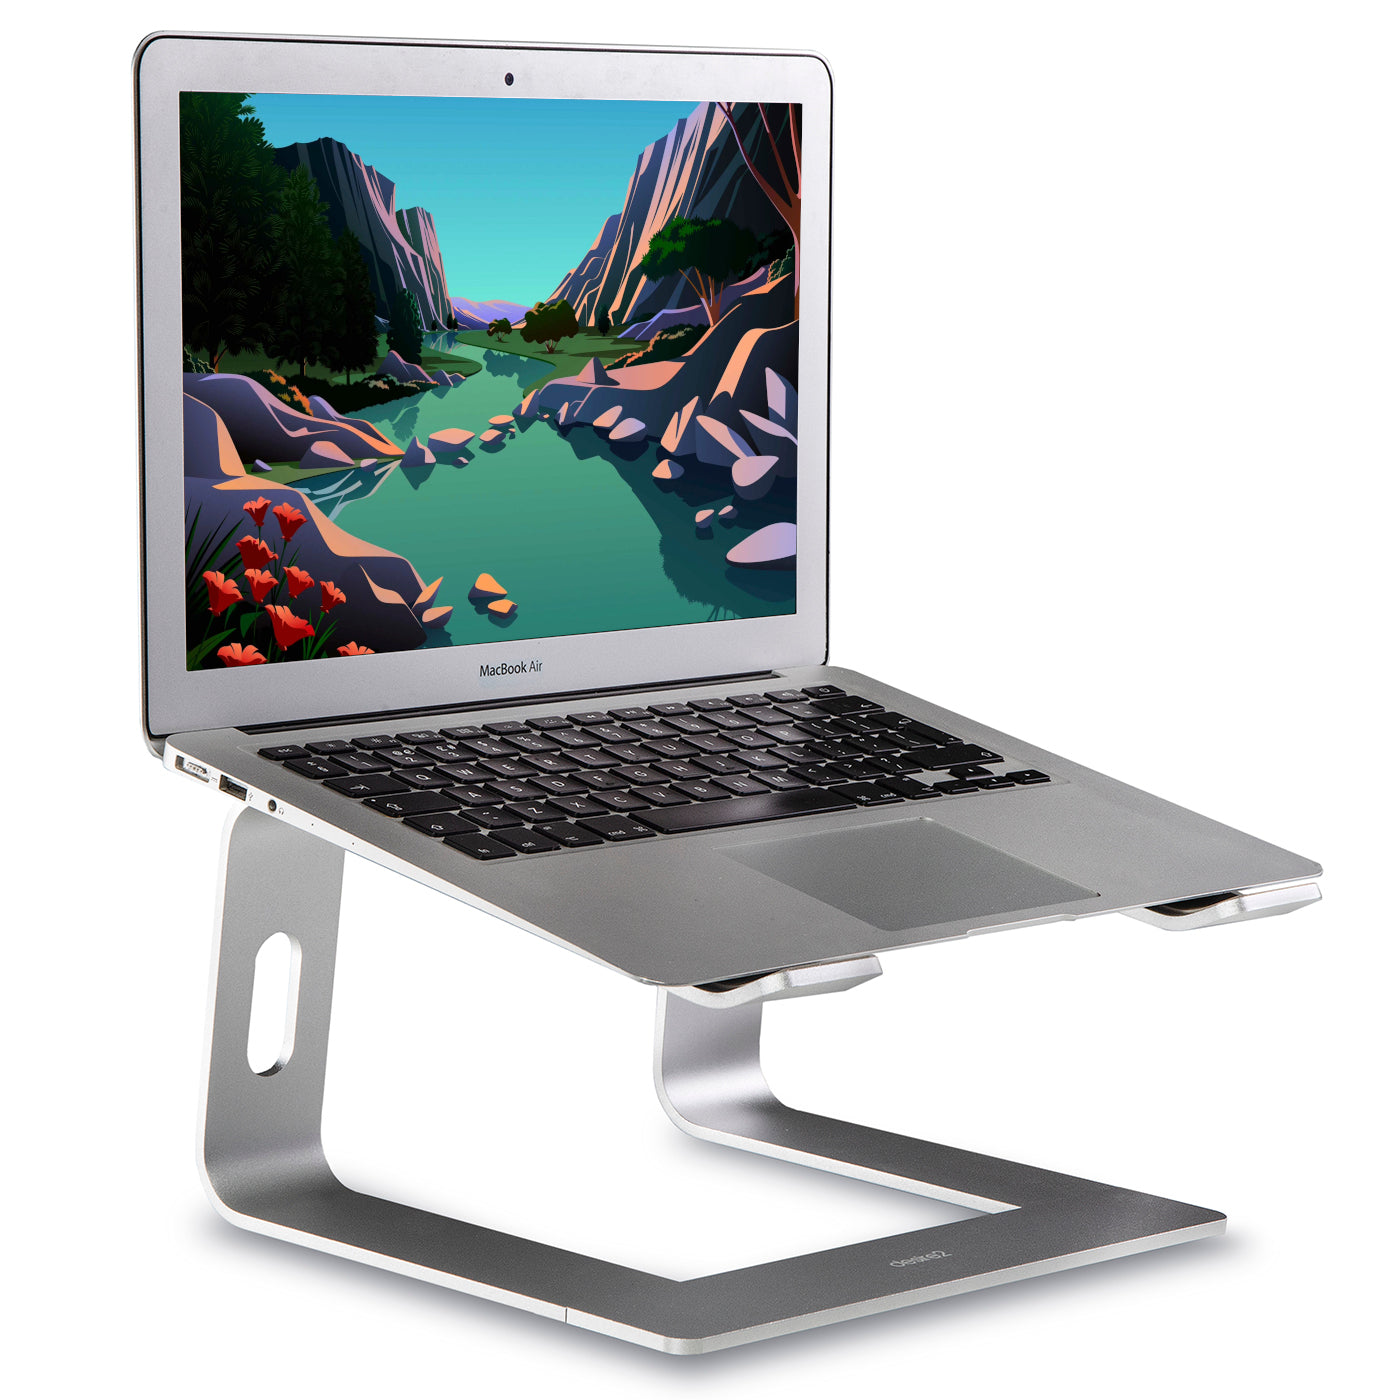 A silver apple macbook air on a well engineered  aluminium laptop stand with solid looking build quality